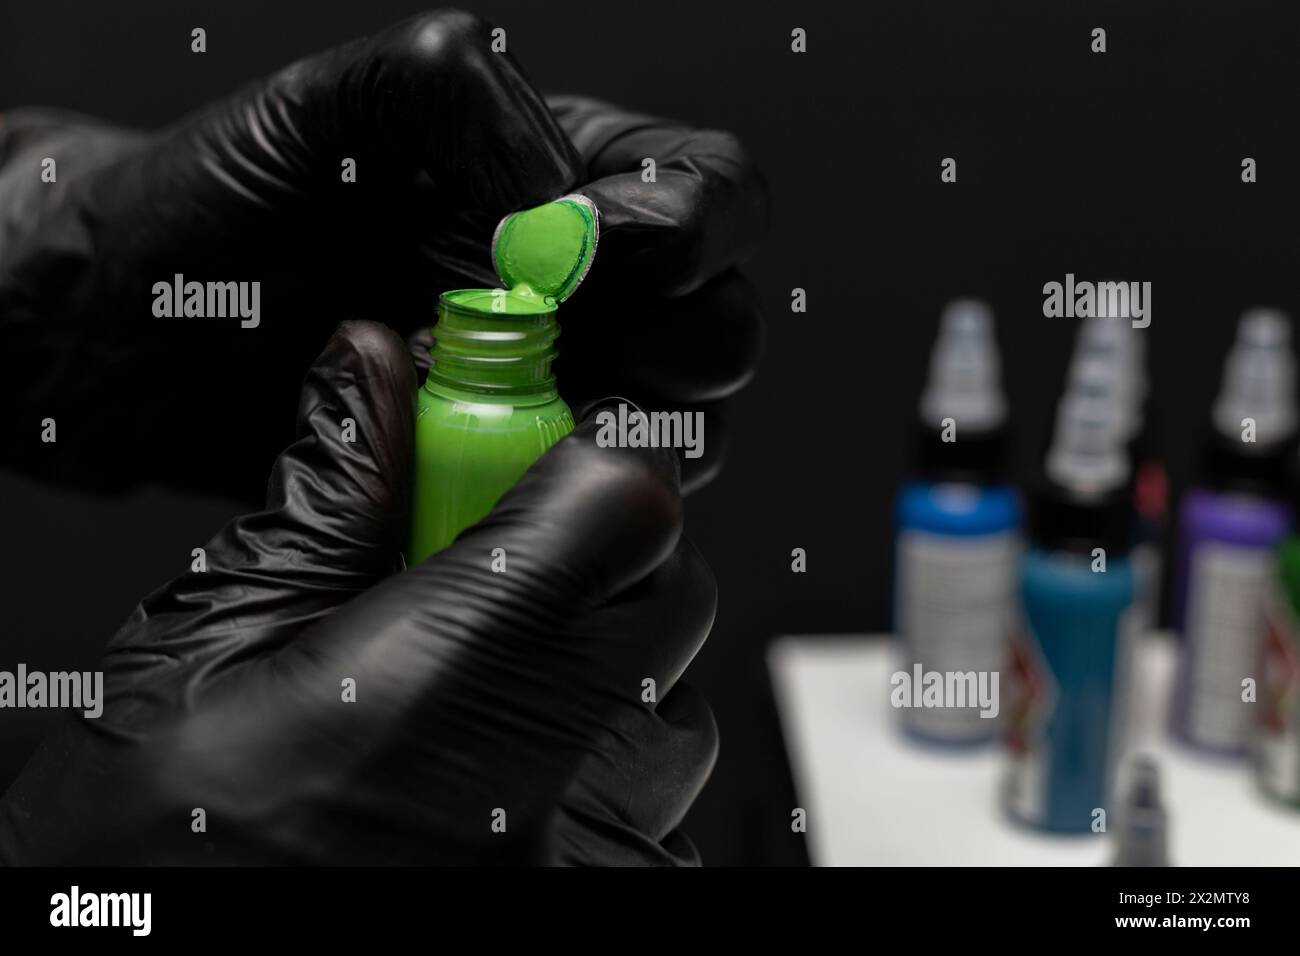 Uncapping a bottle of green tattoo ink, background of bottles of different inks and work table. Body art concept Stock Photo